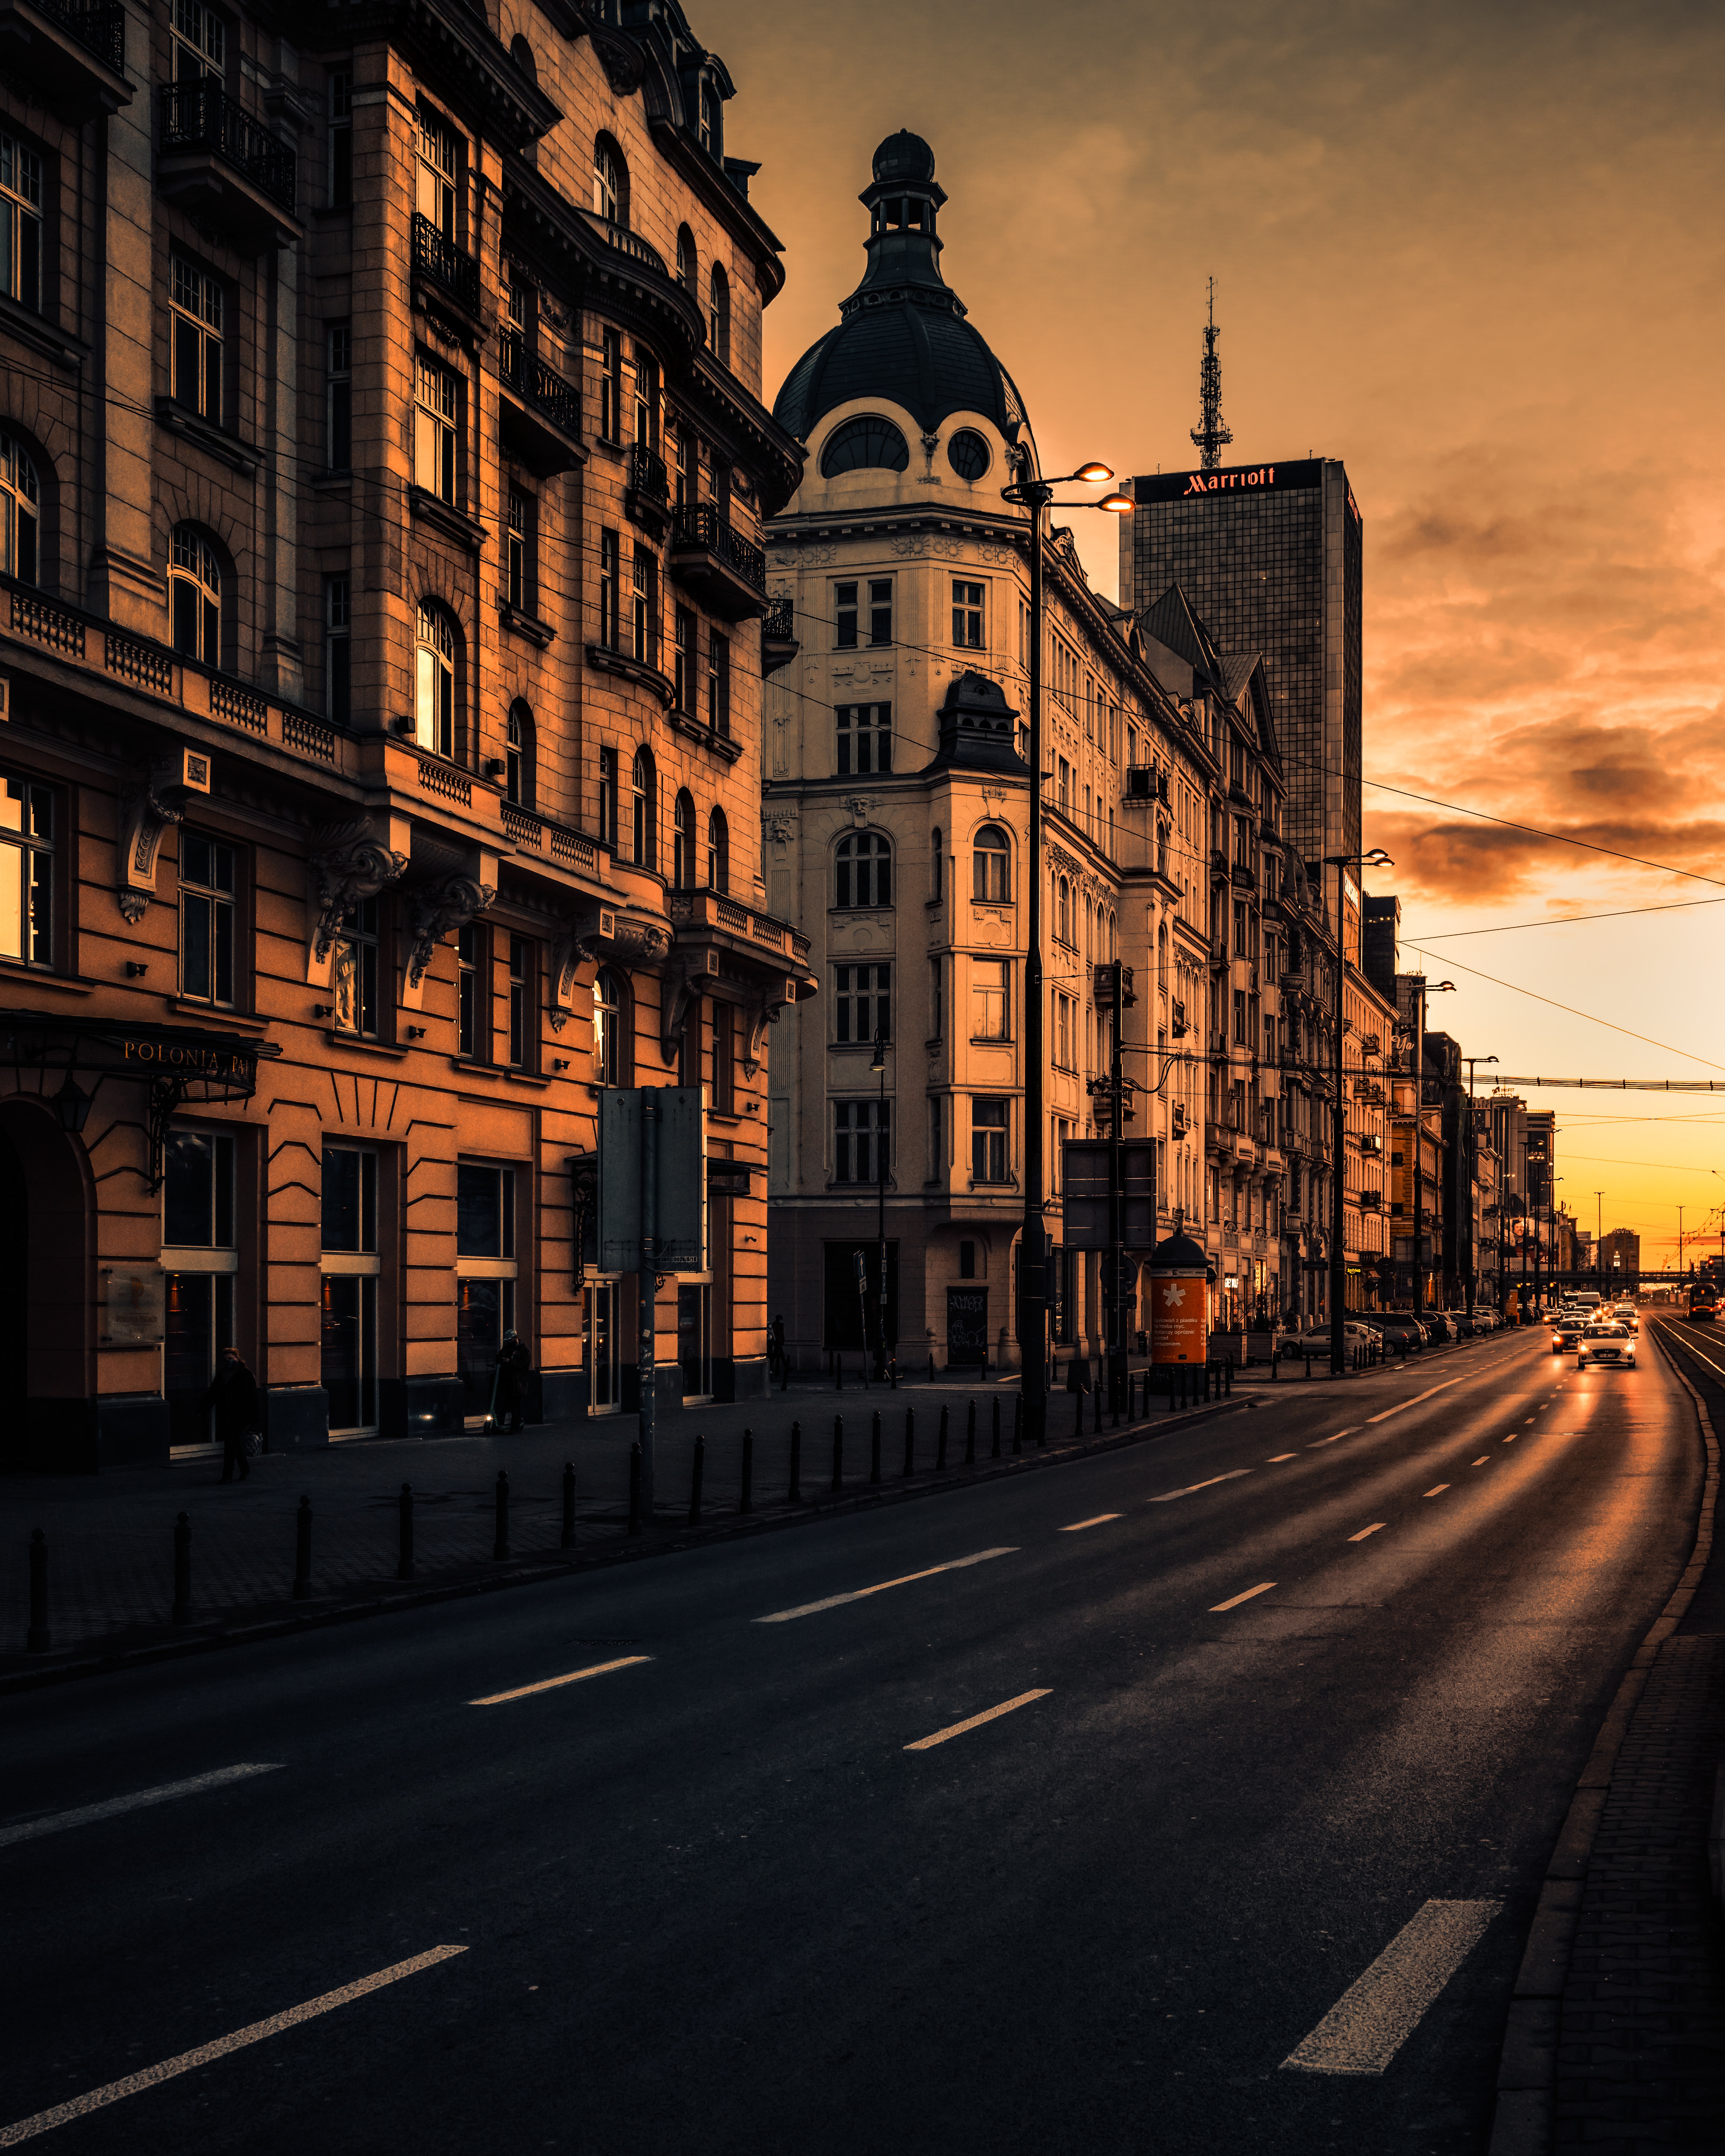 sunset, cities, architecture, cars, city, building, road 1080p